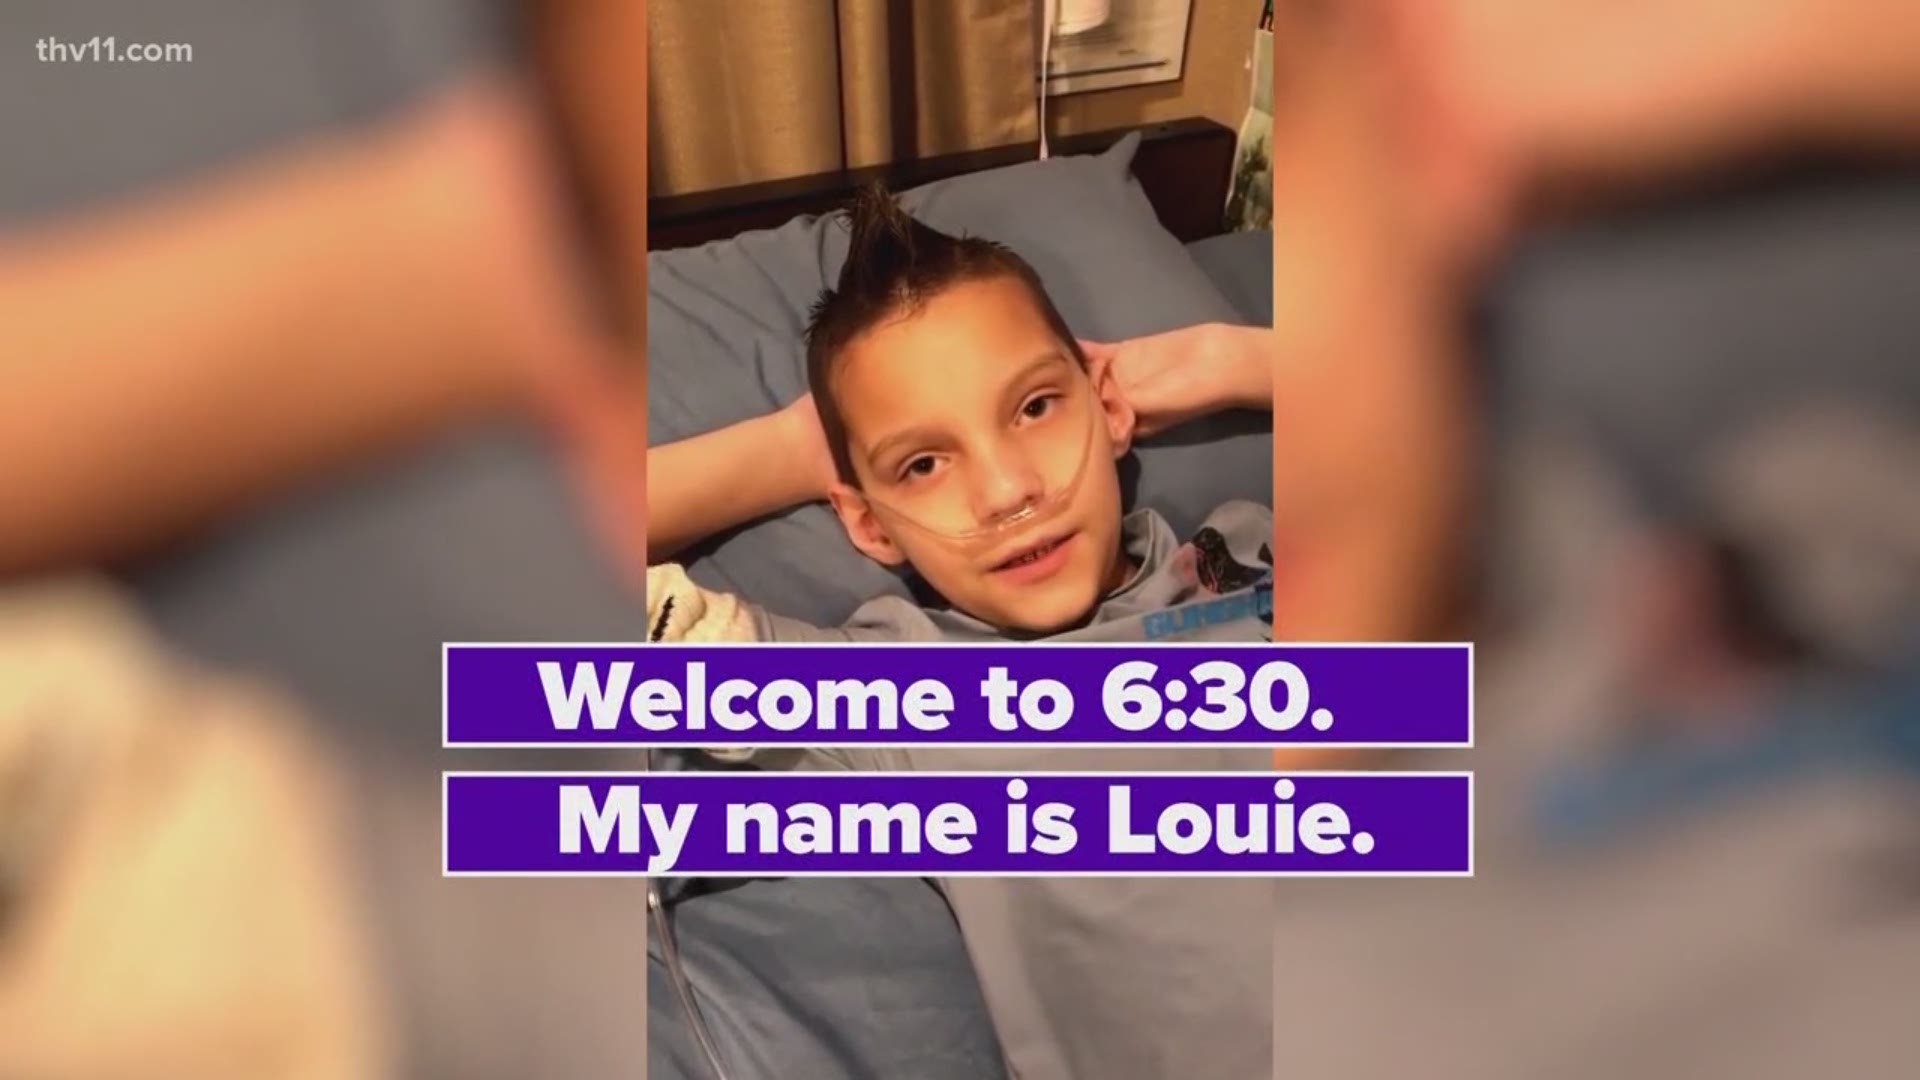 Louie is by all accounts a miracle. Today, he needed a little encouragement, and our viewers did not disappoint.